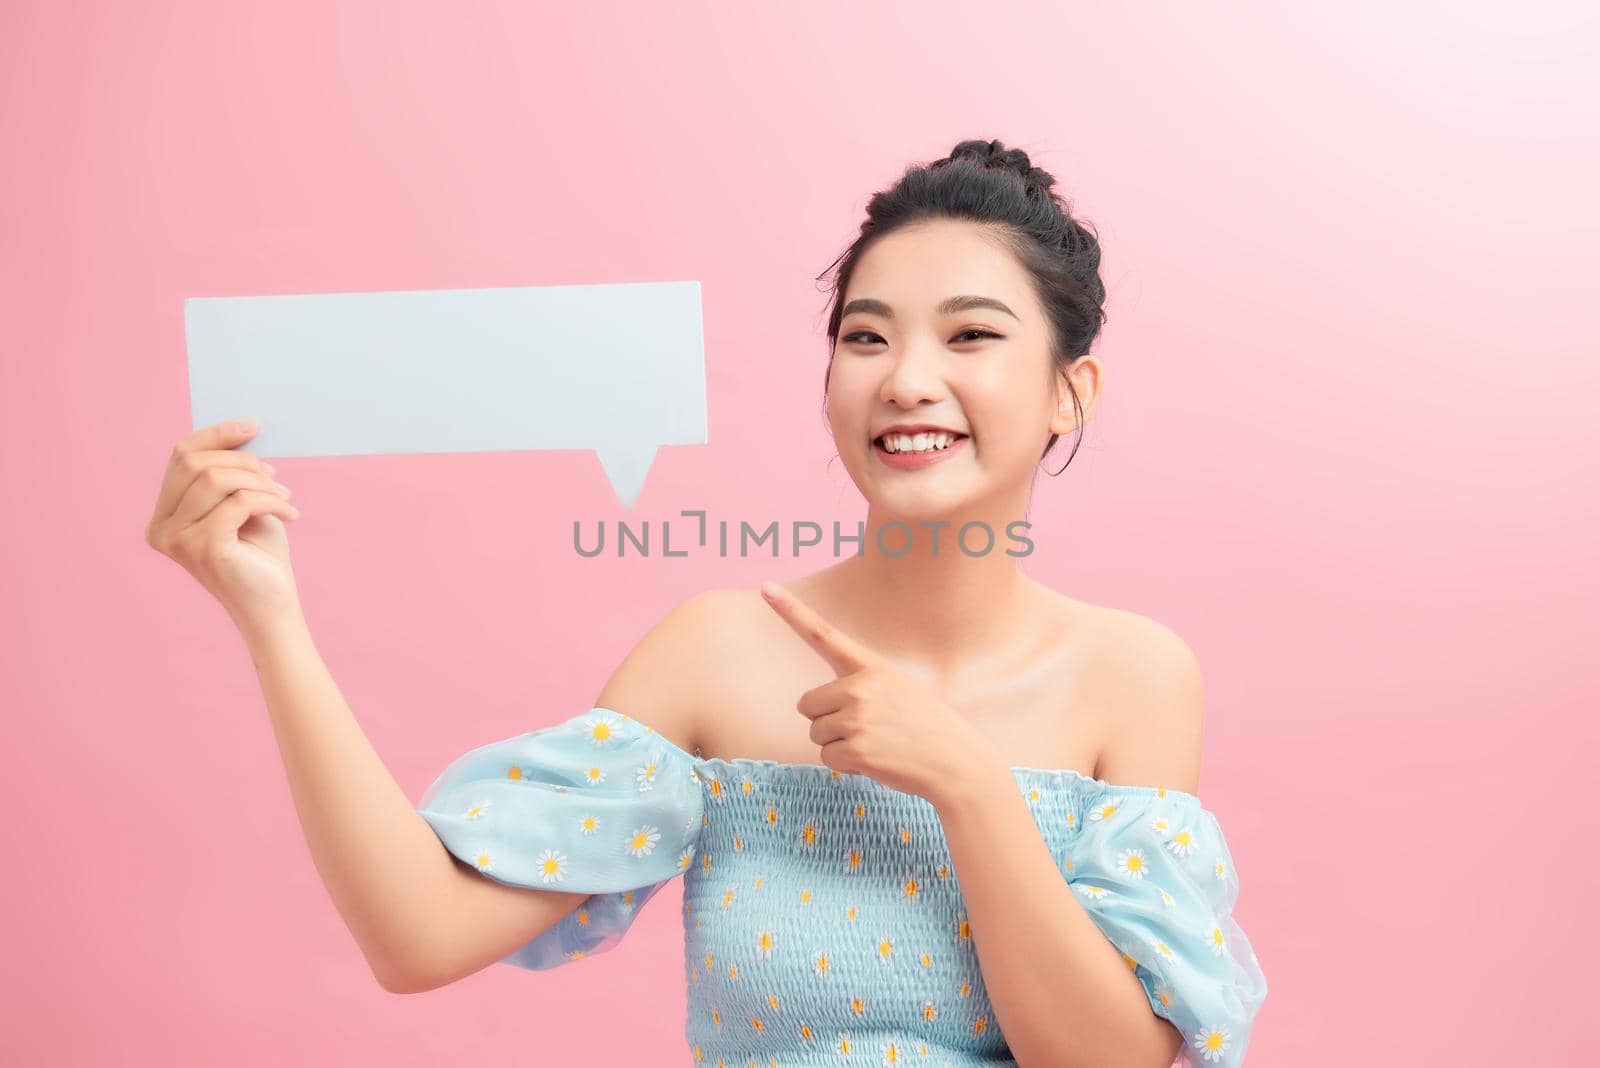 Happy Asian Girl Having Idea Holding Blank Speech Bubble Smiling on pink background by makidotvn